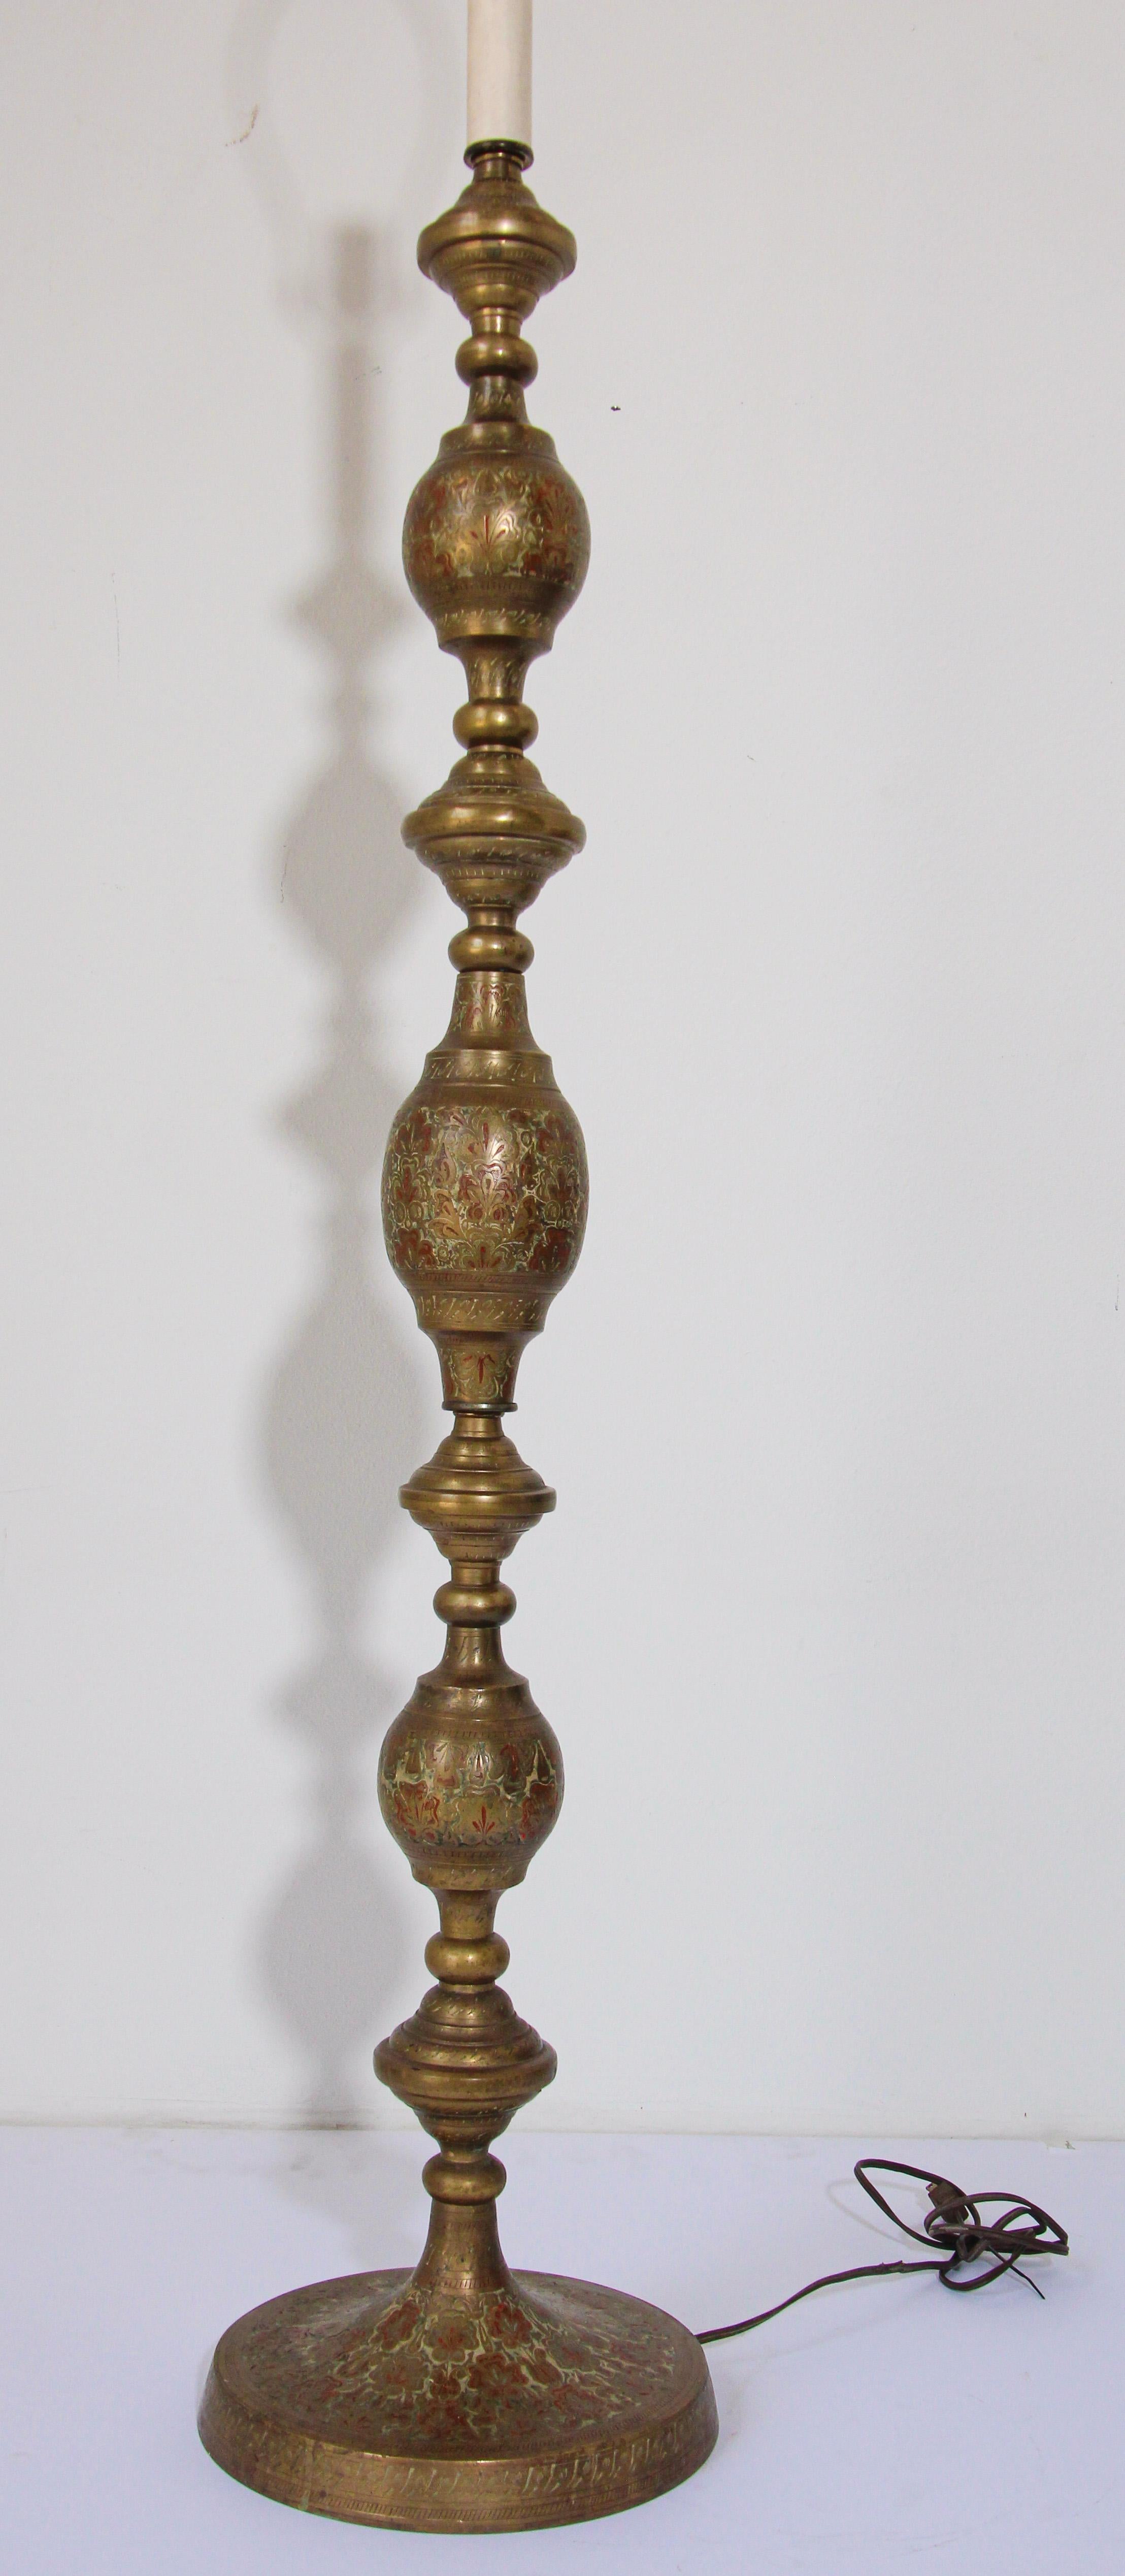 Vintage brass and enamel Anglo-Indian floor lamp hand crafted brass in an exotic repeating bulb construction.
Midcentury Anglo Indian brass floor lamp hand-crafted in brass with a classic form incised with exotic floral designs hand-painted with